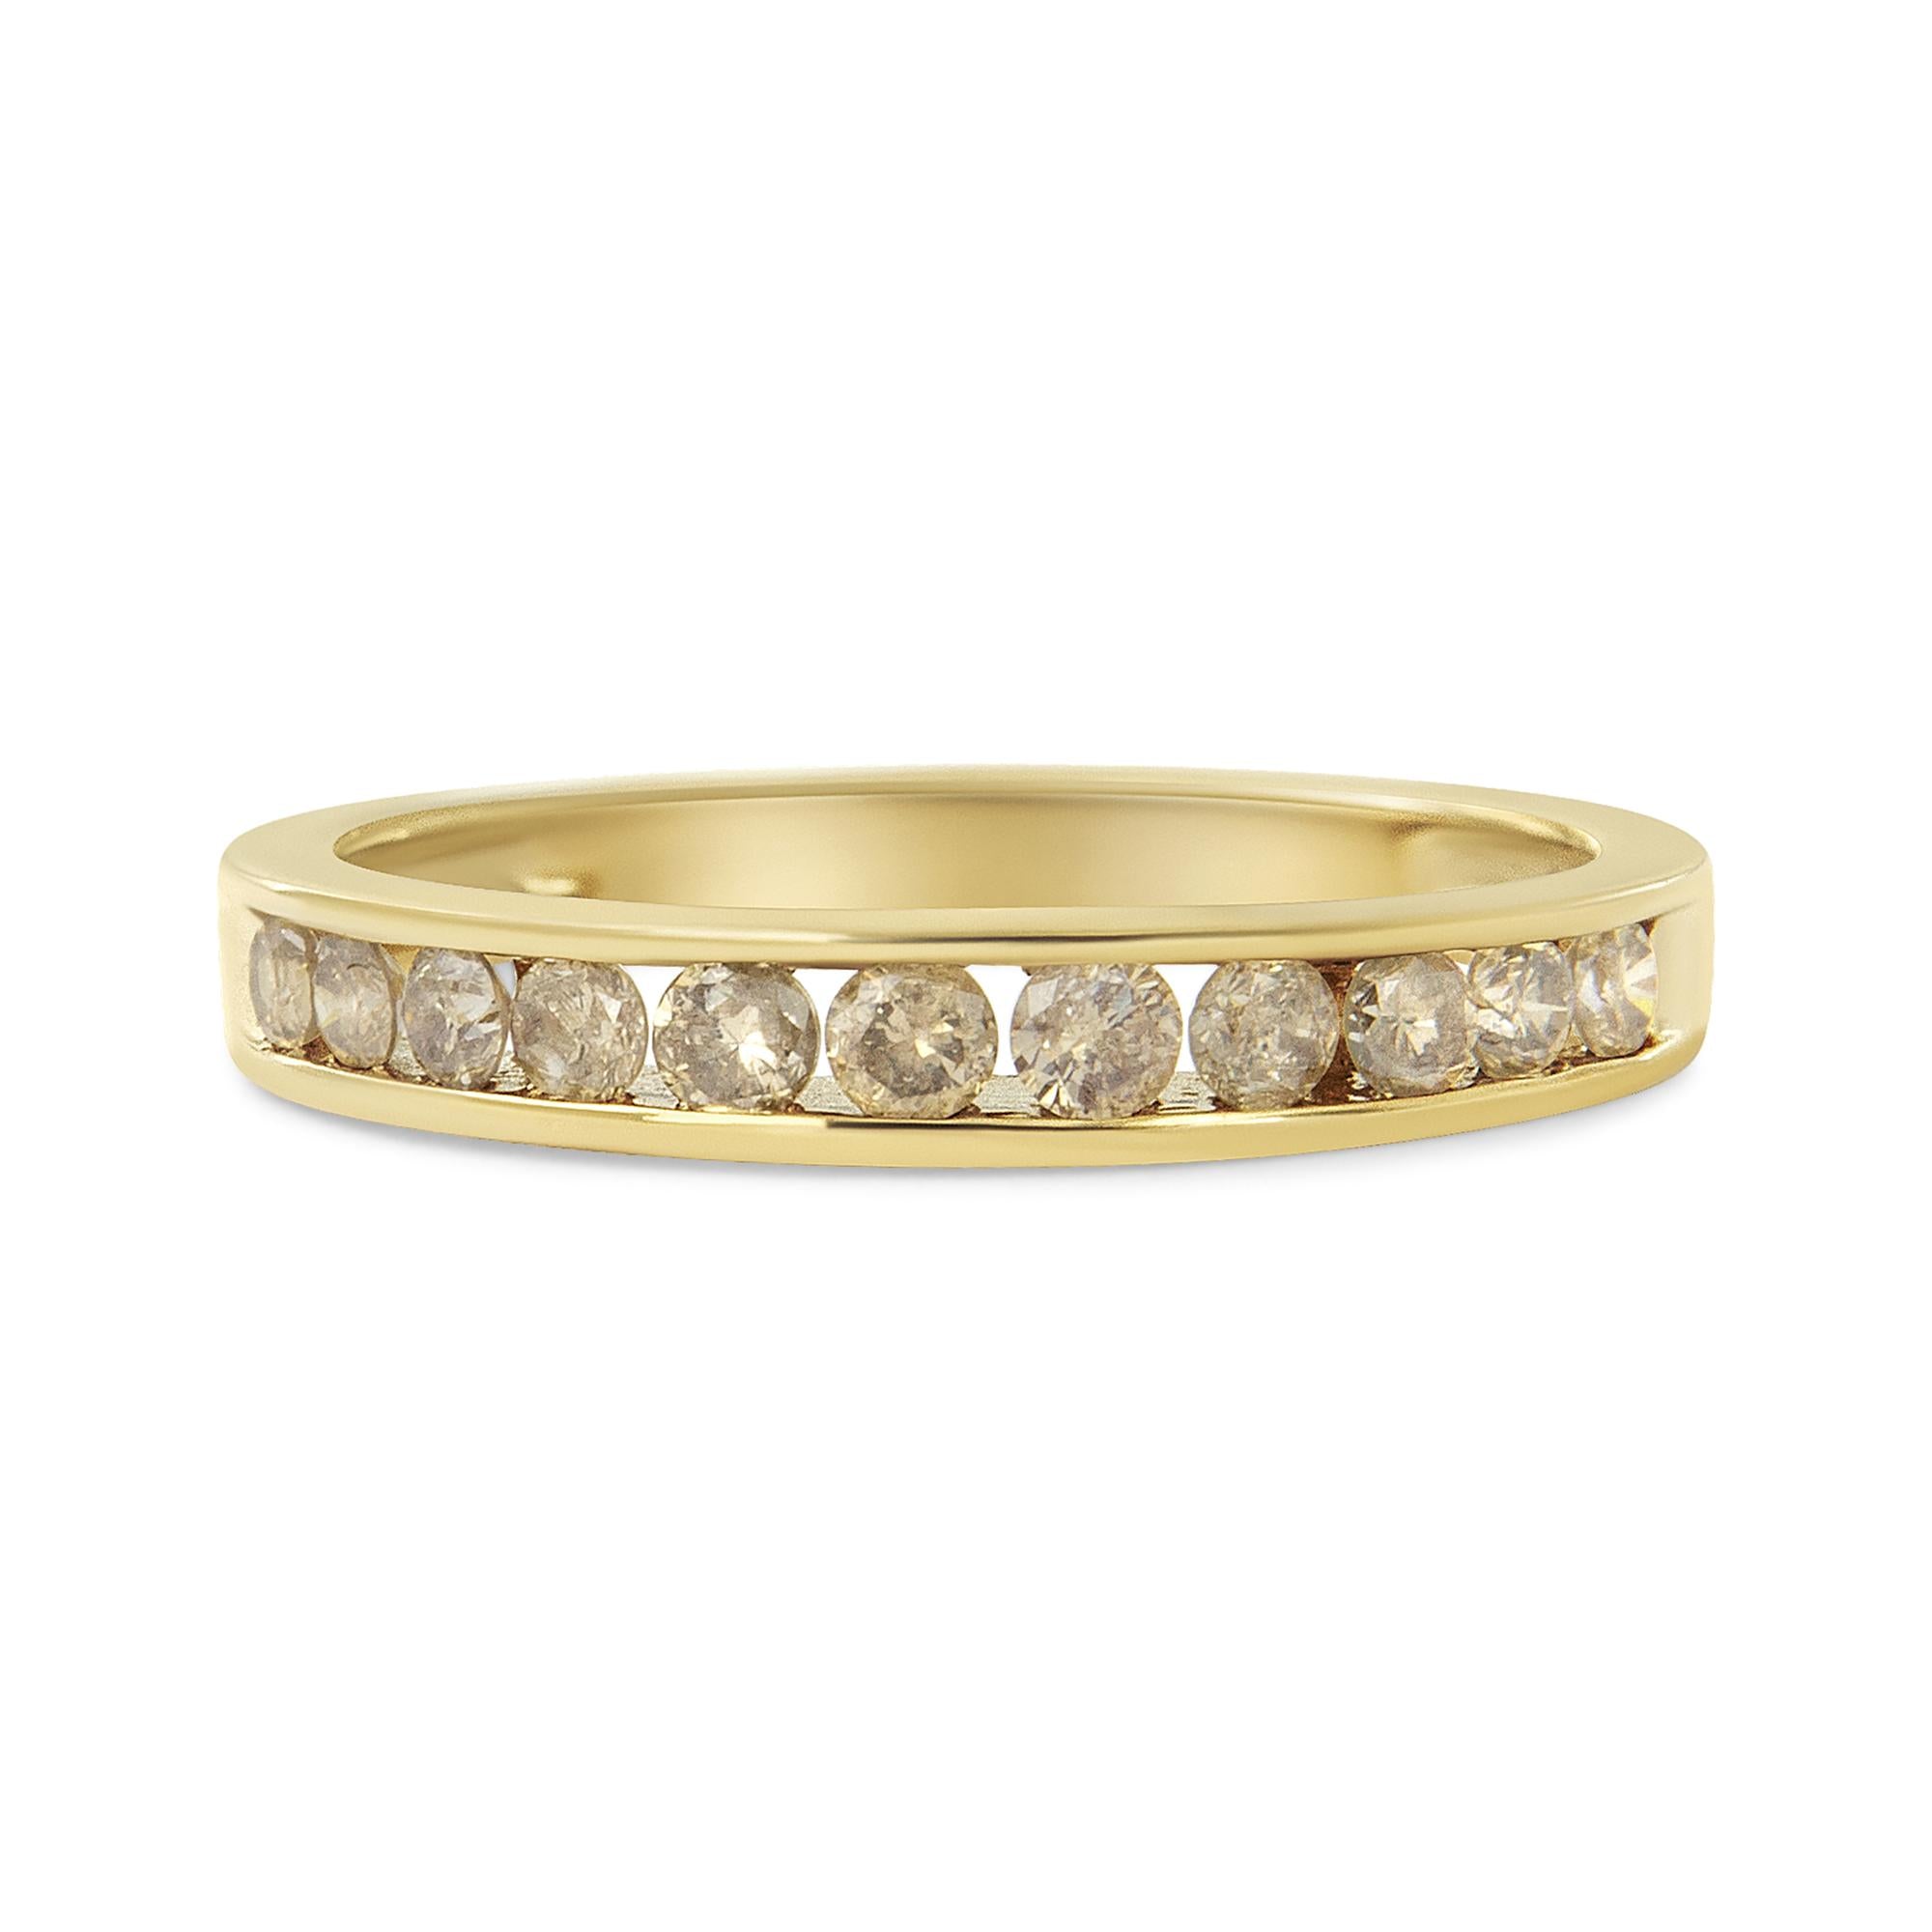 Celebrate Everlasting Love with Our Glittering 14K Yellow Gold Plated Diamond Band Ring!